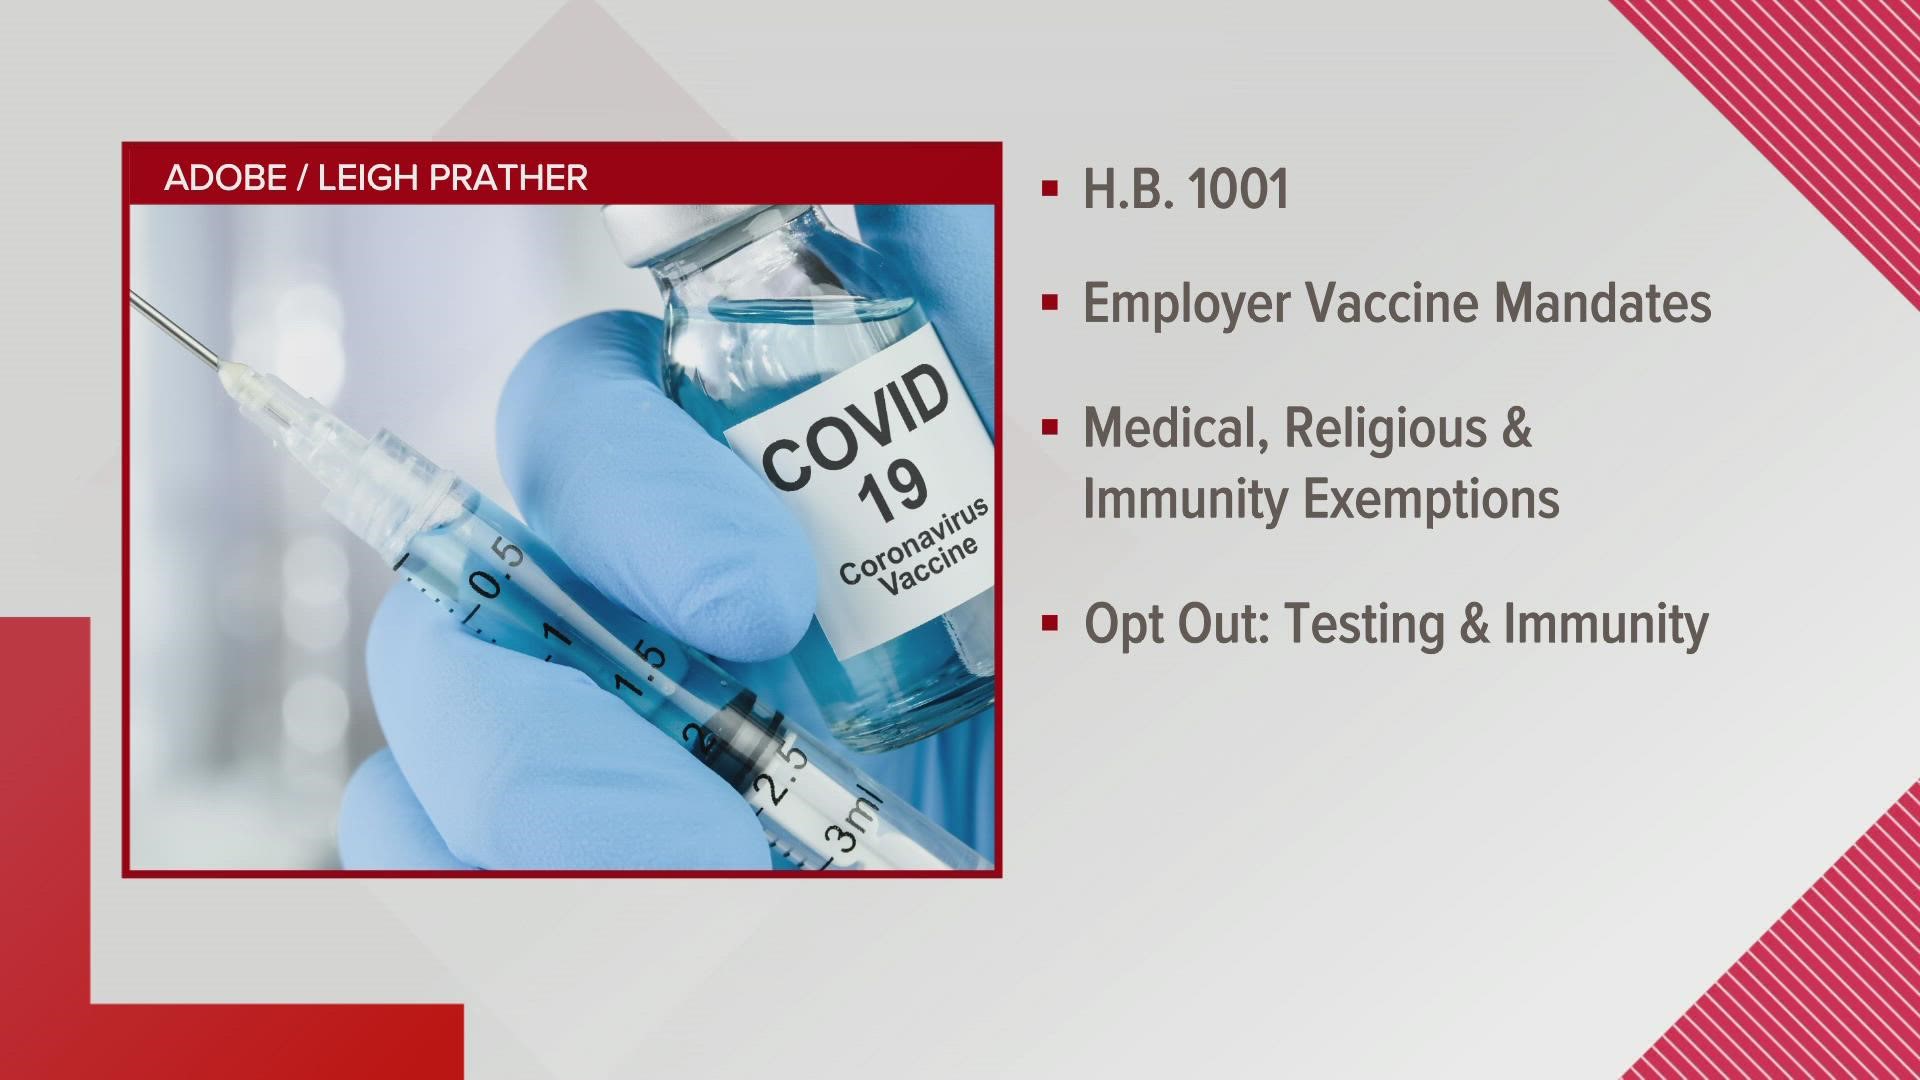 Any business requiring the Covid vaccine for employees has to recognize medical, religious  and natural immunity exemptions.